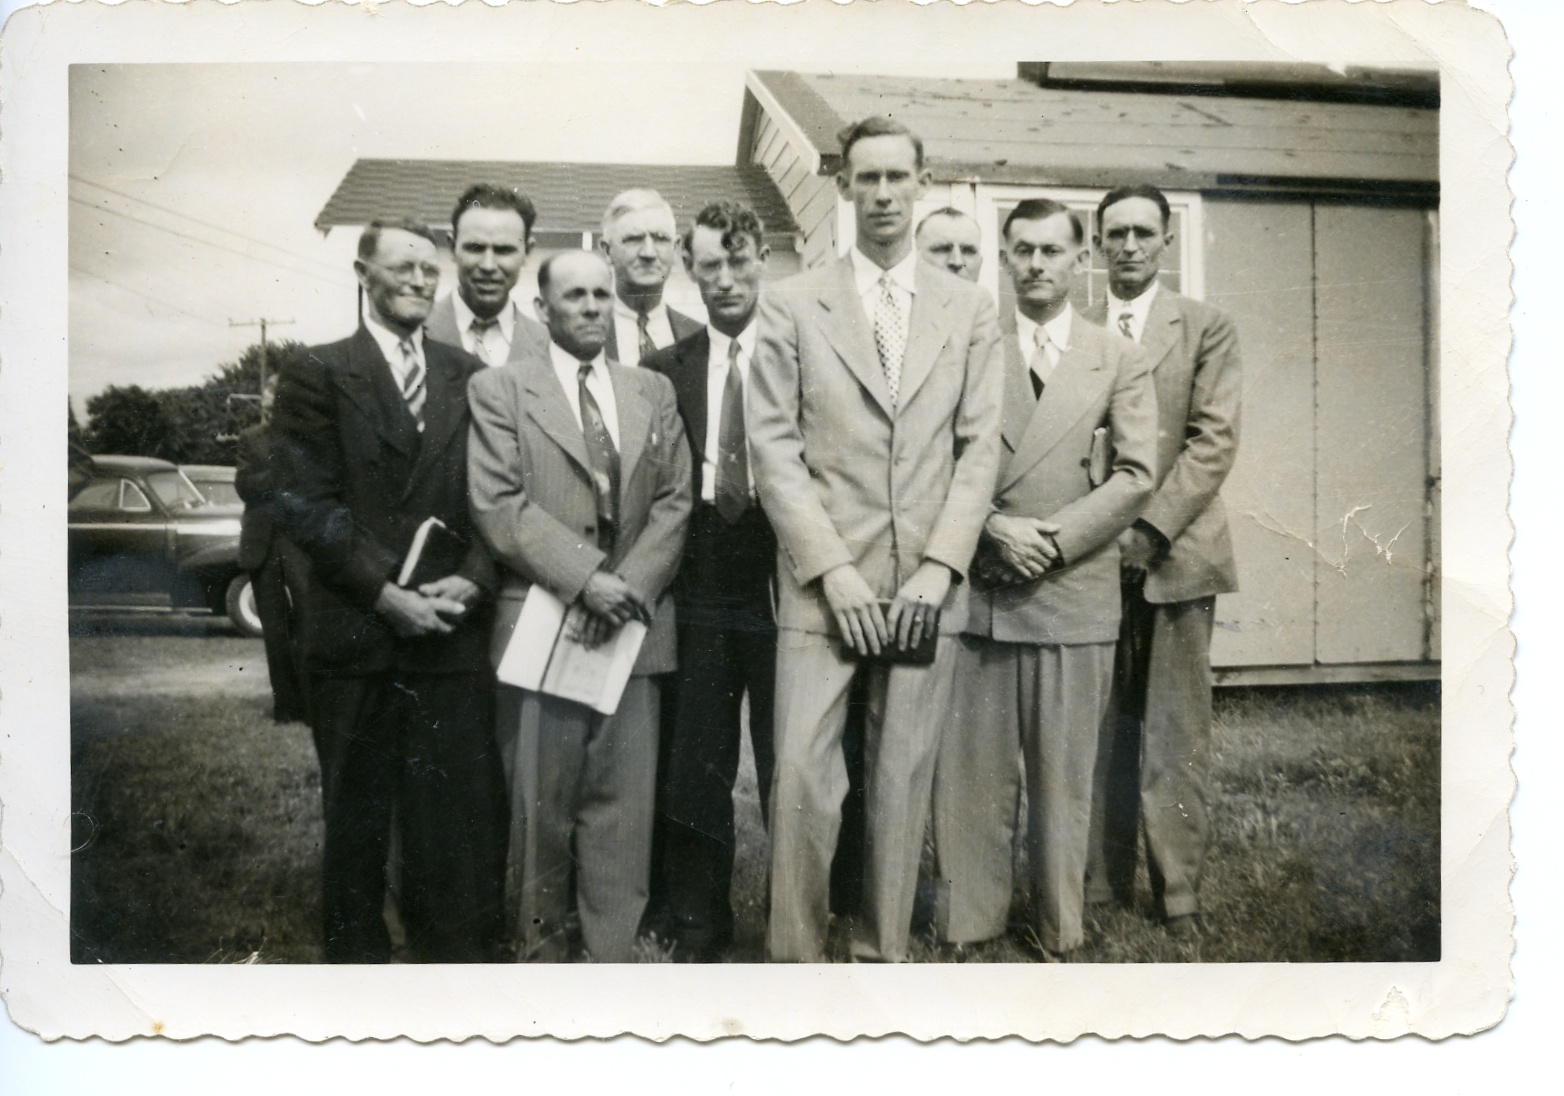 My Dad, the tall guy in the center, being ordained as a baptist minister